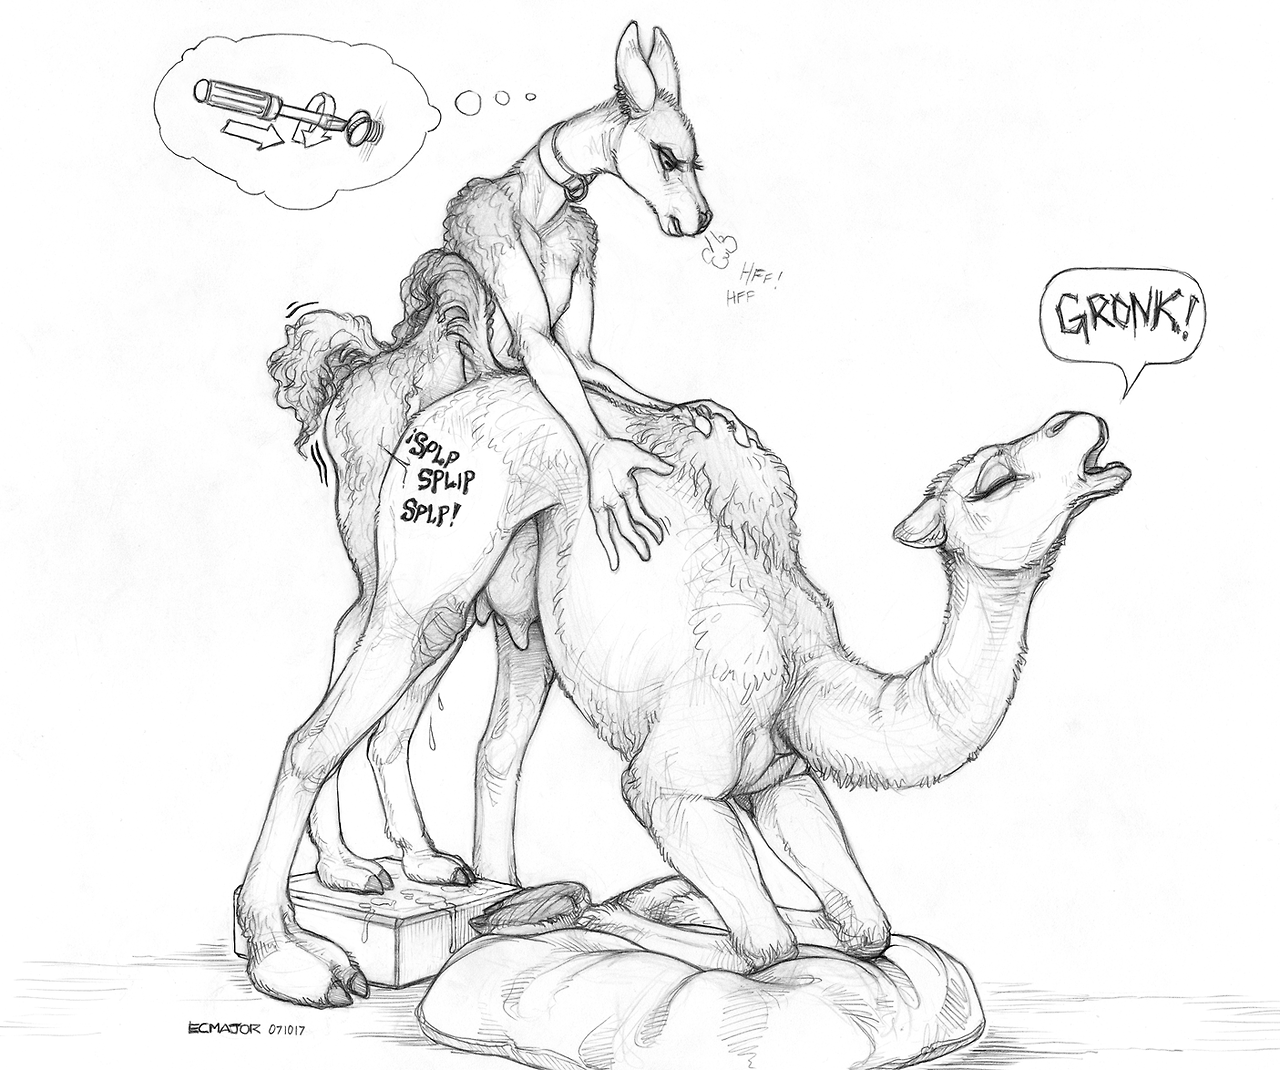 I can’t stop drawing help.here have Santiago fucking a camel giving a camel a backrub